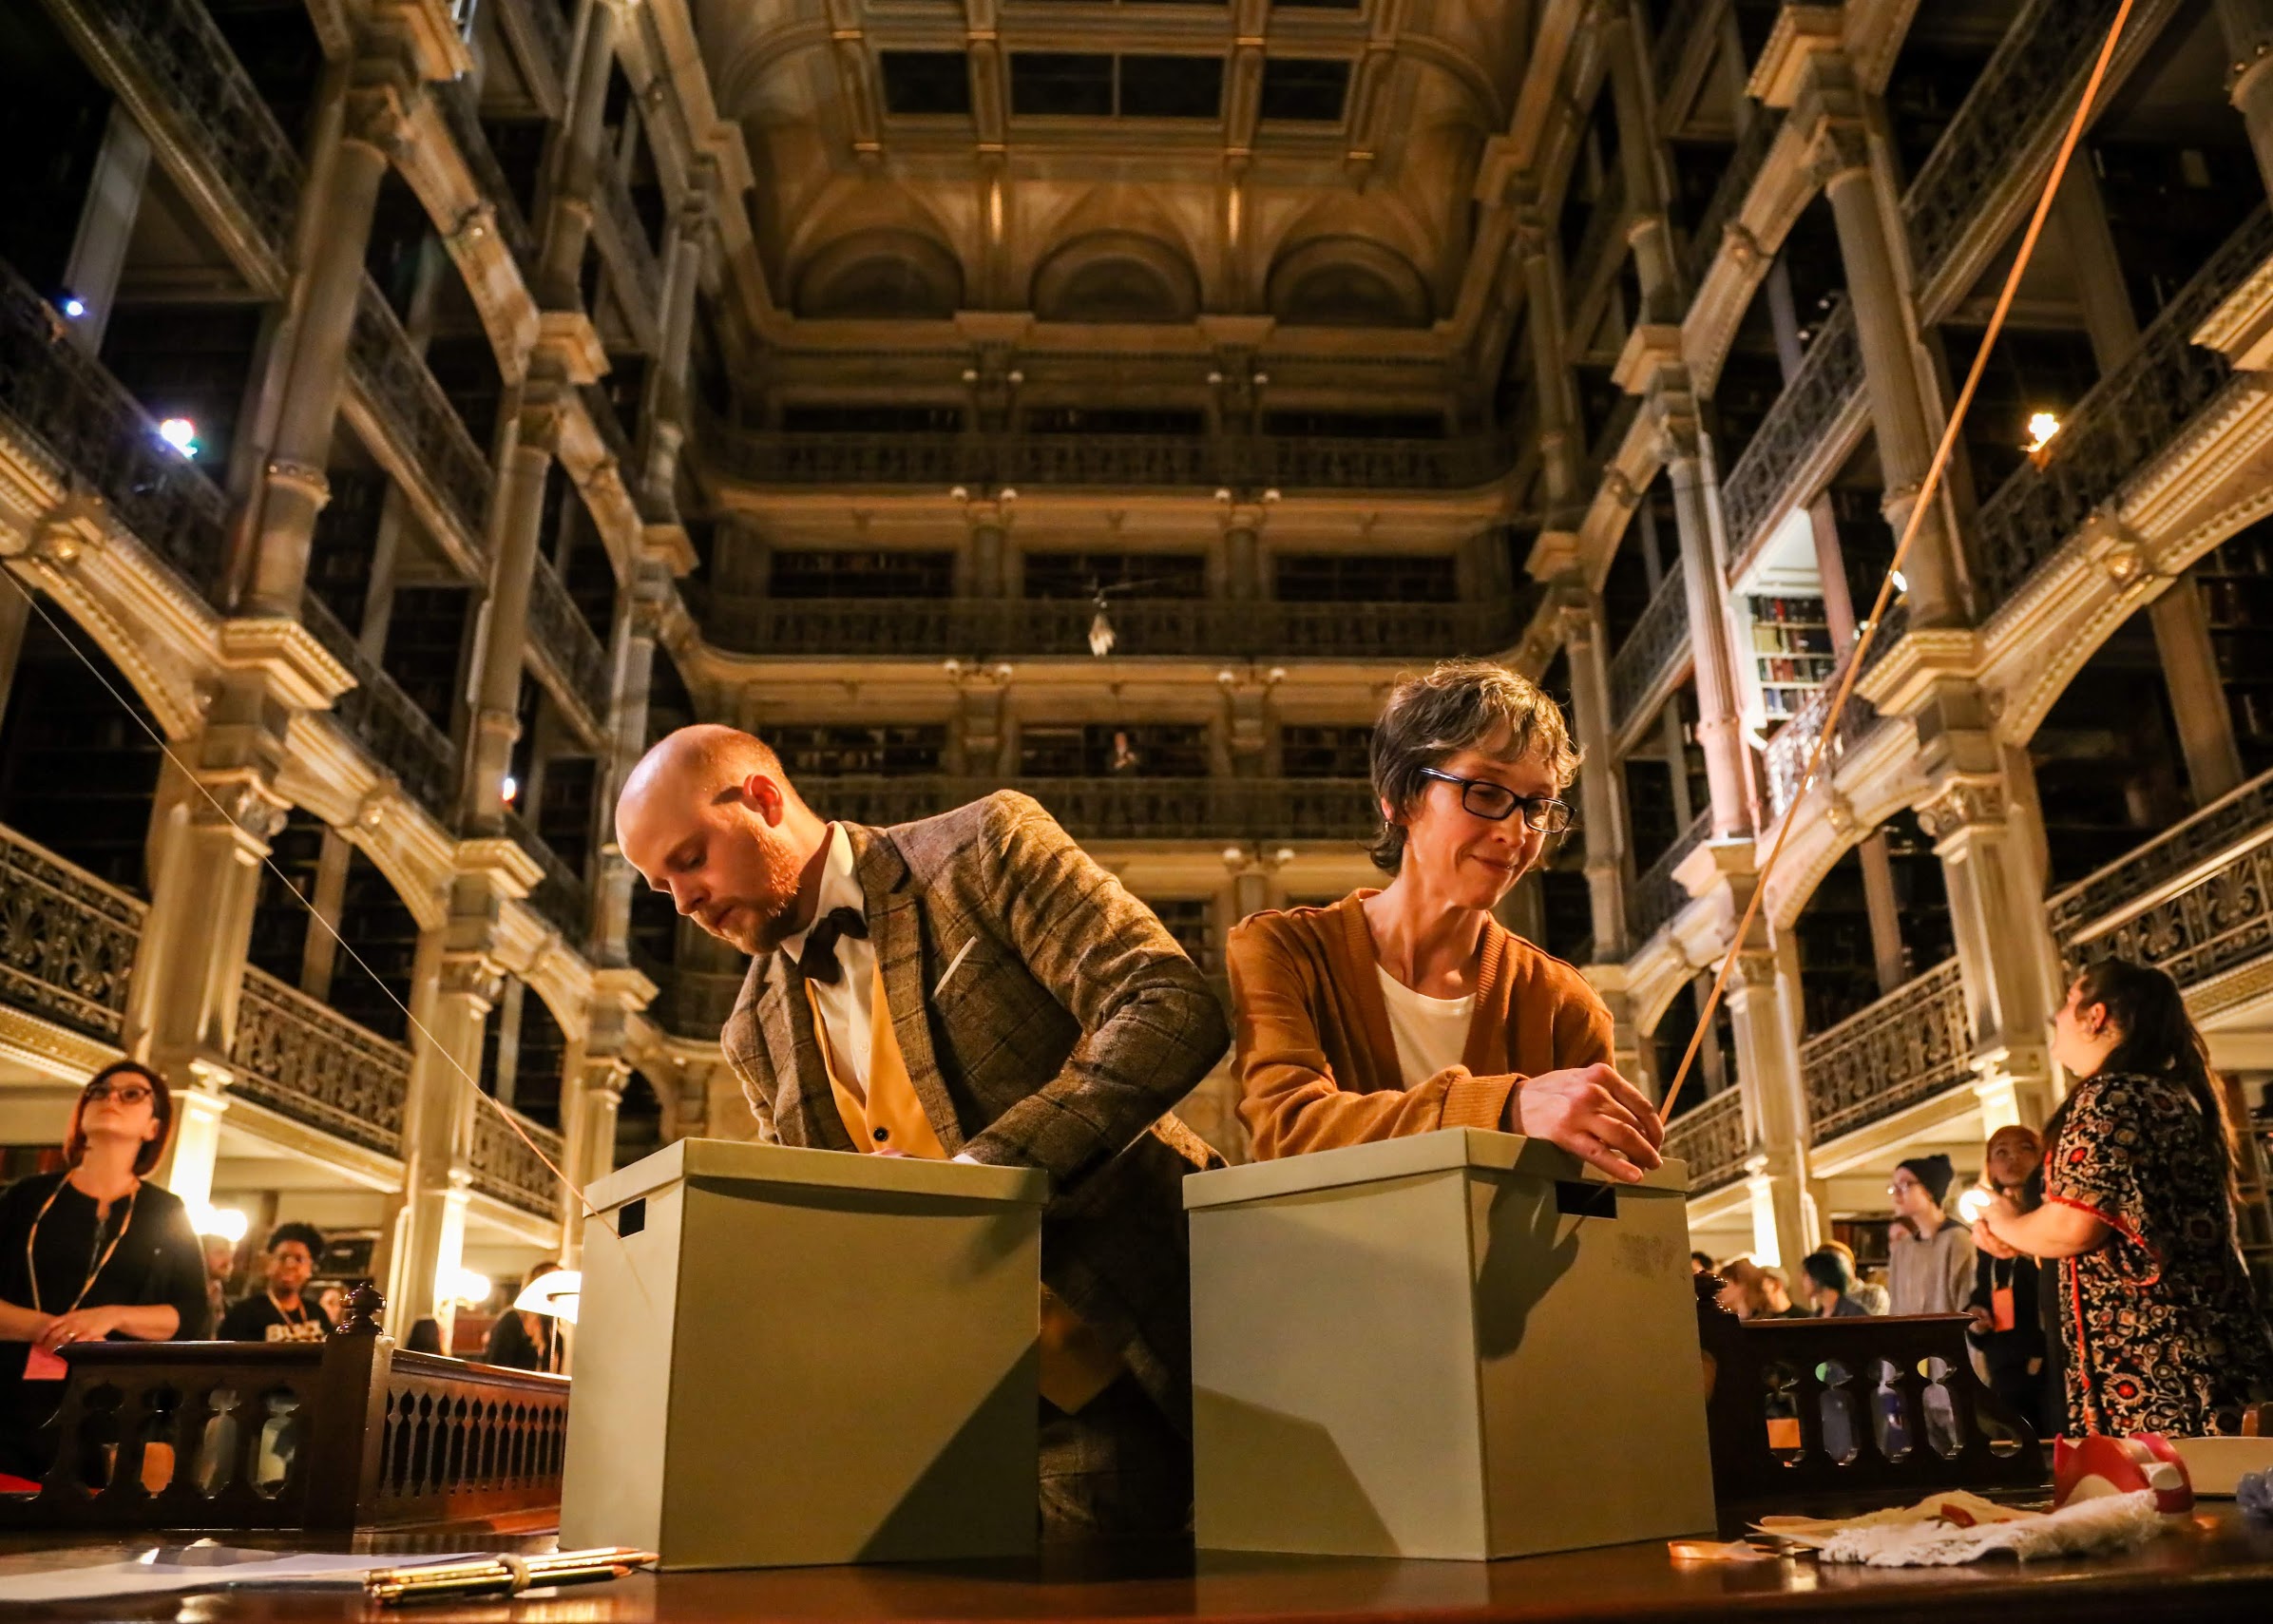 See Also - performers David Brasington and Ursula Marcum rewind the connecting threads back into their archive boxes at the close of the show in the library